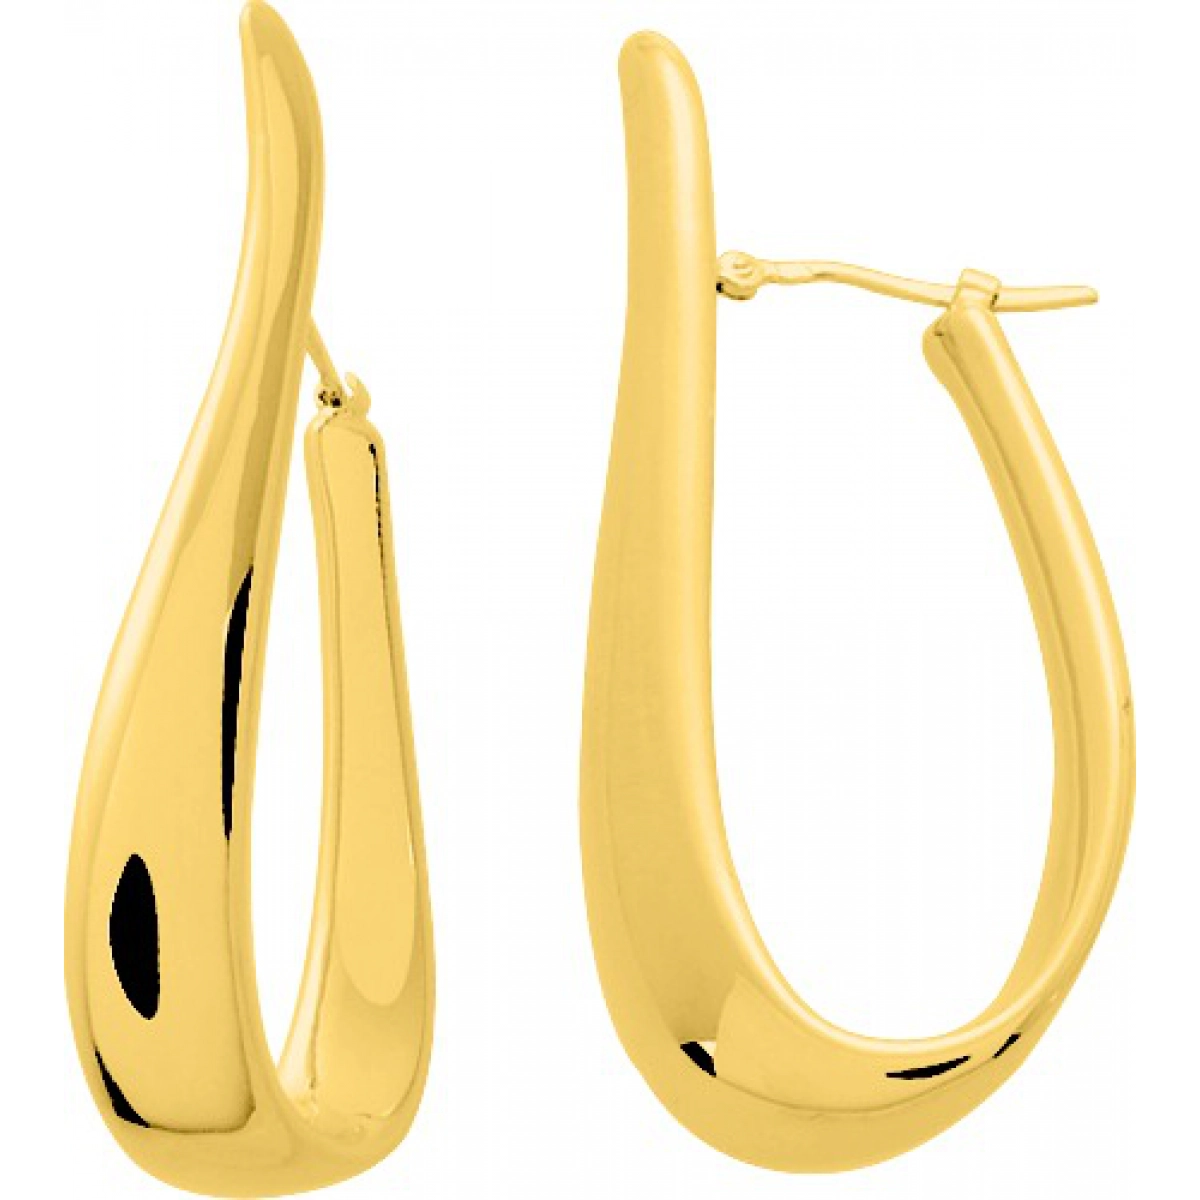 Earrings pair electroformed gold plated Brass  Lua Blanca  135550.0